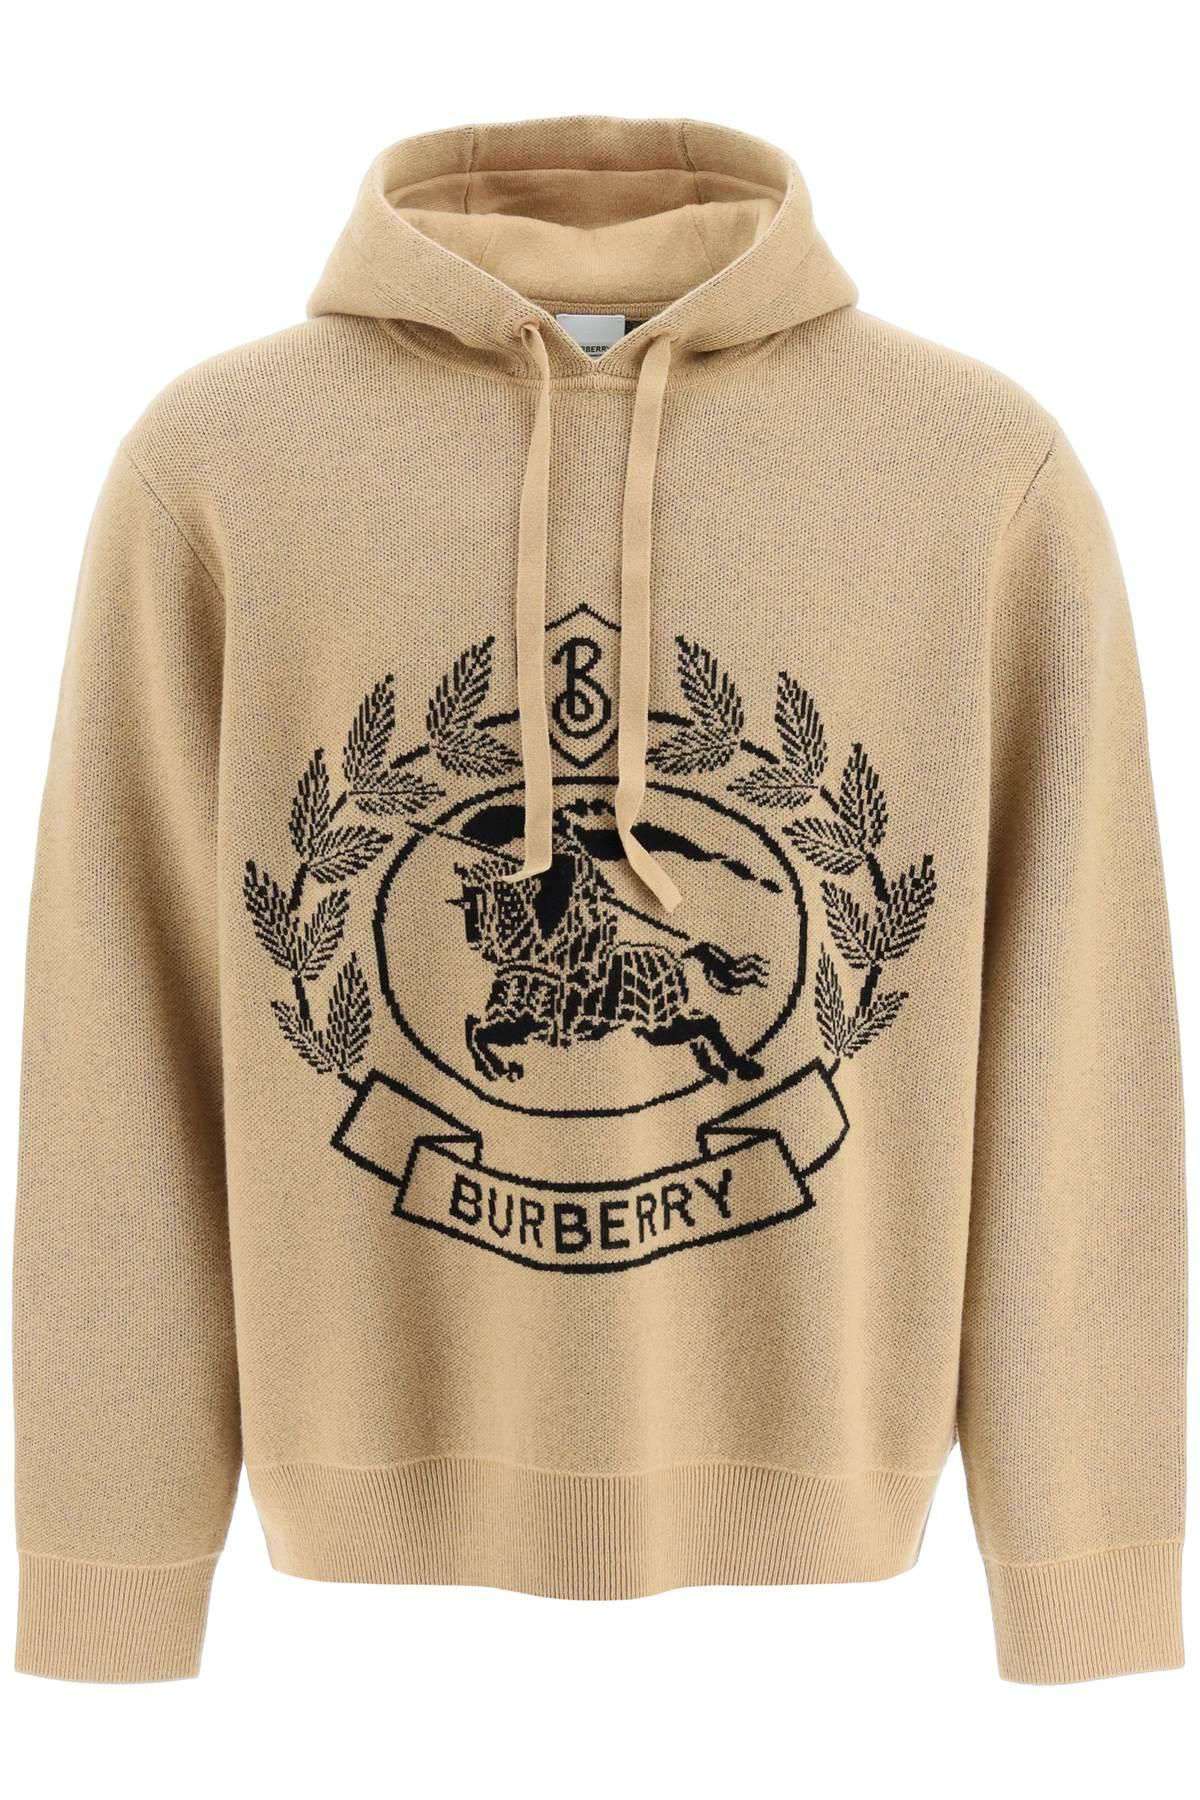 Burberry Equestrian Knight Jacquard Knit Hoodie in Natural for Men | Lyst